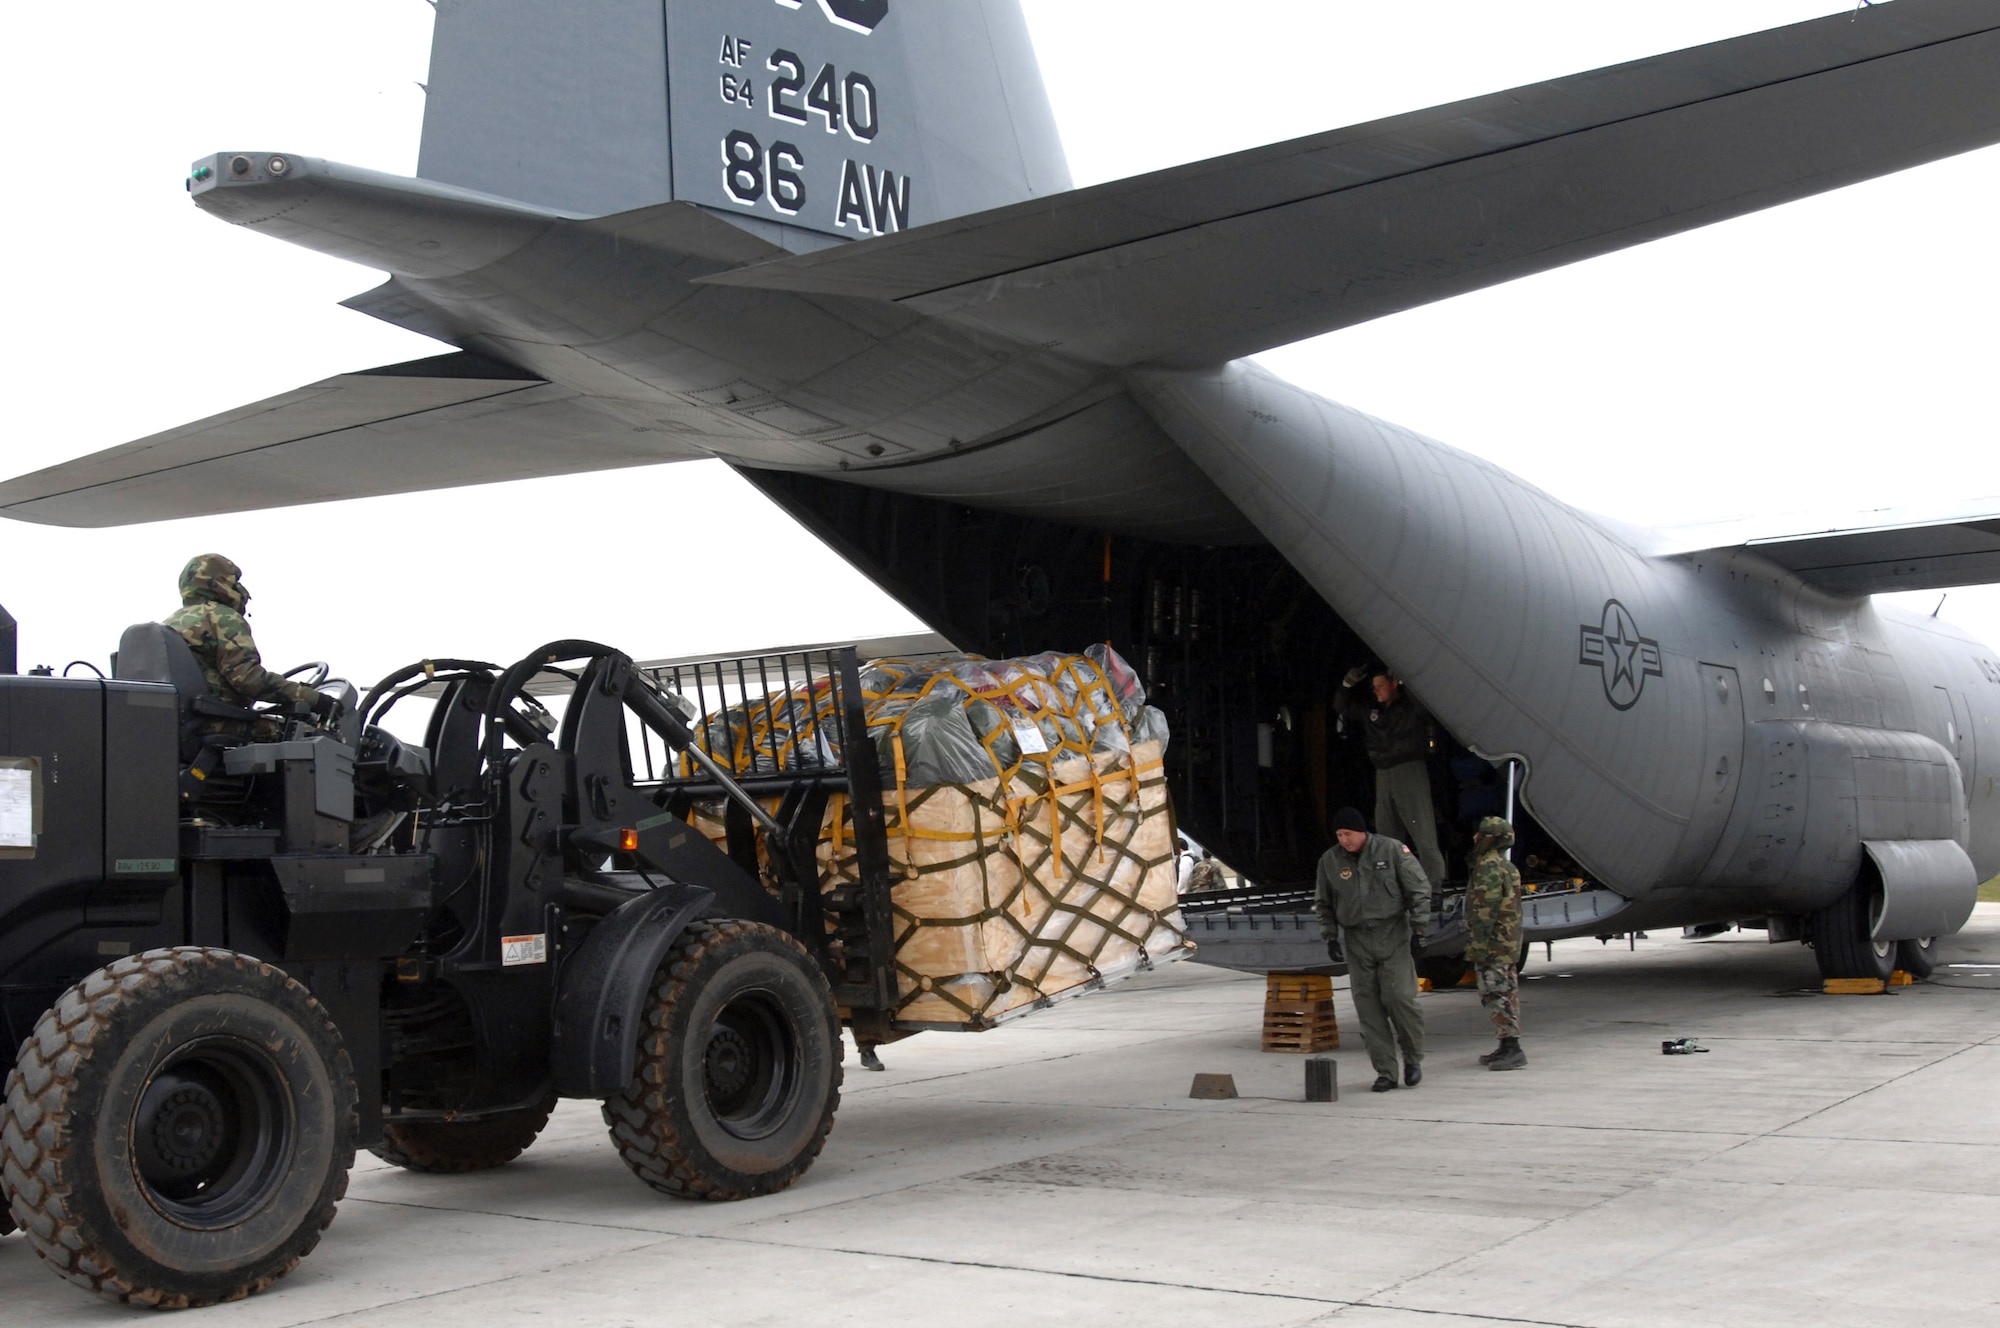 Airmen from the 404th Expeditionary Air Base Squadron unload pallets from a 86th Airlift Wing C-130 Hercules dropping off cargo and personnel here March 25. A four-man team of Airmen received and processed more than 500,000 pounds of cargo here toward building up U.S. operations at the base in support of the NATO summit. The U.S forces are augmenting NATO by providing infrastructure and aircraft for the duration of summit in Bucharest, Romania, April 2-4. (U.S. Air Force photo/Senior Airman Teresa M. Hawkins)